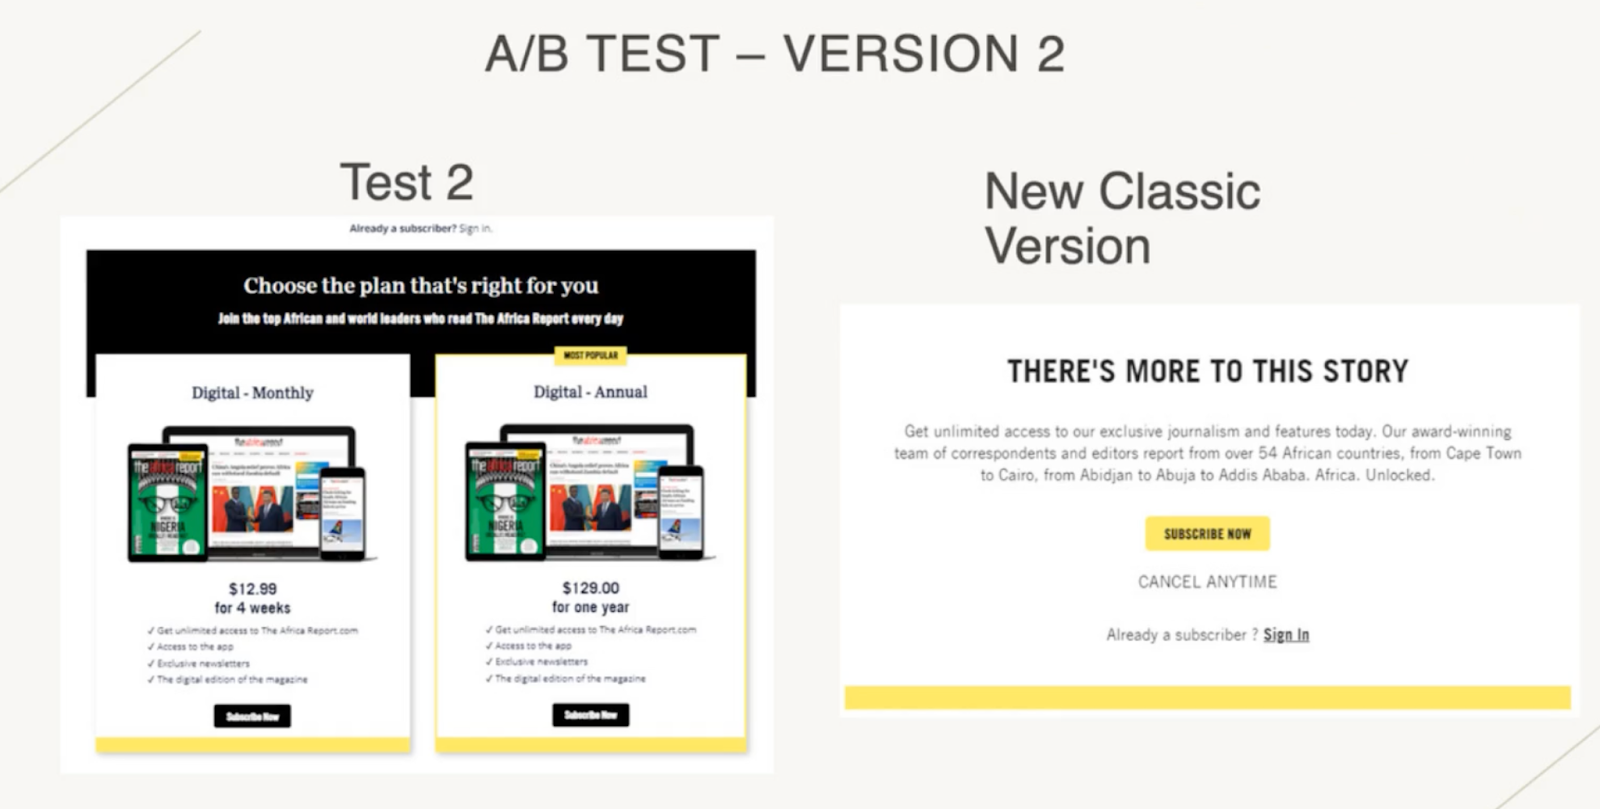 A/B testing offers on the paywall